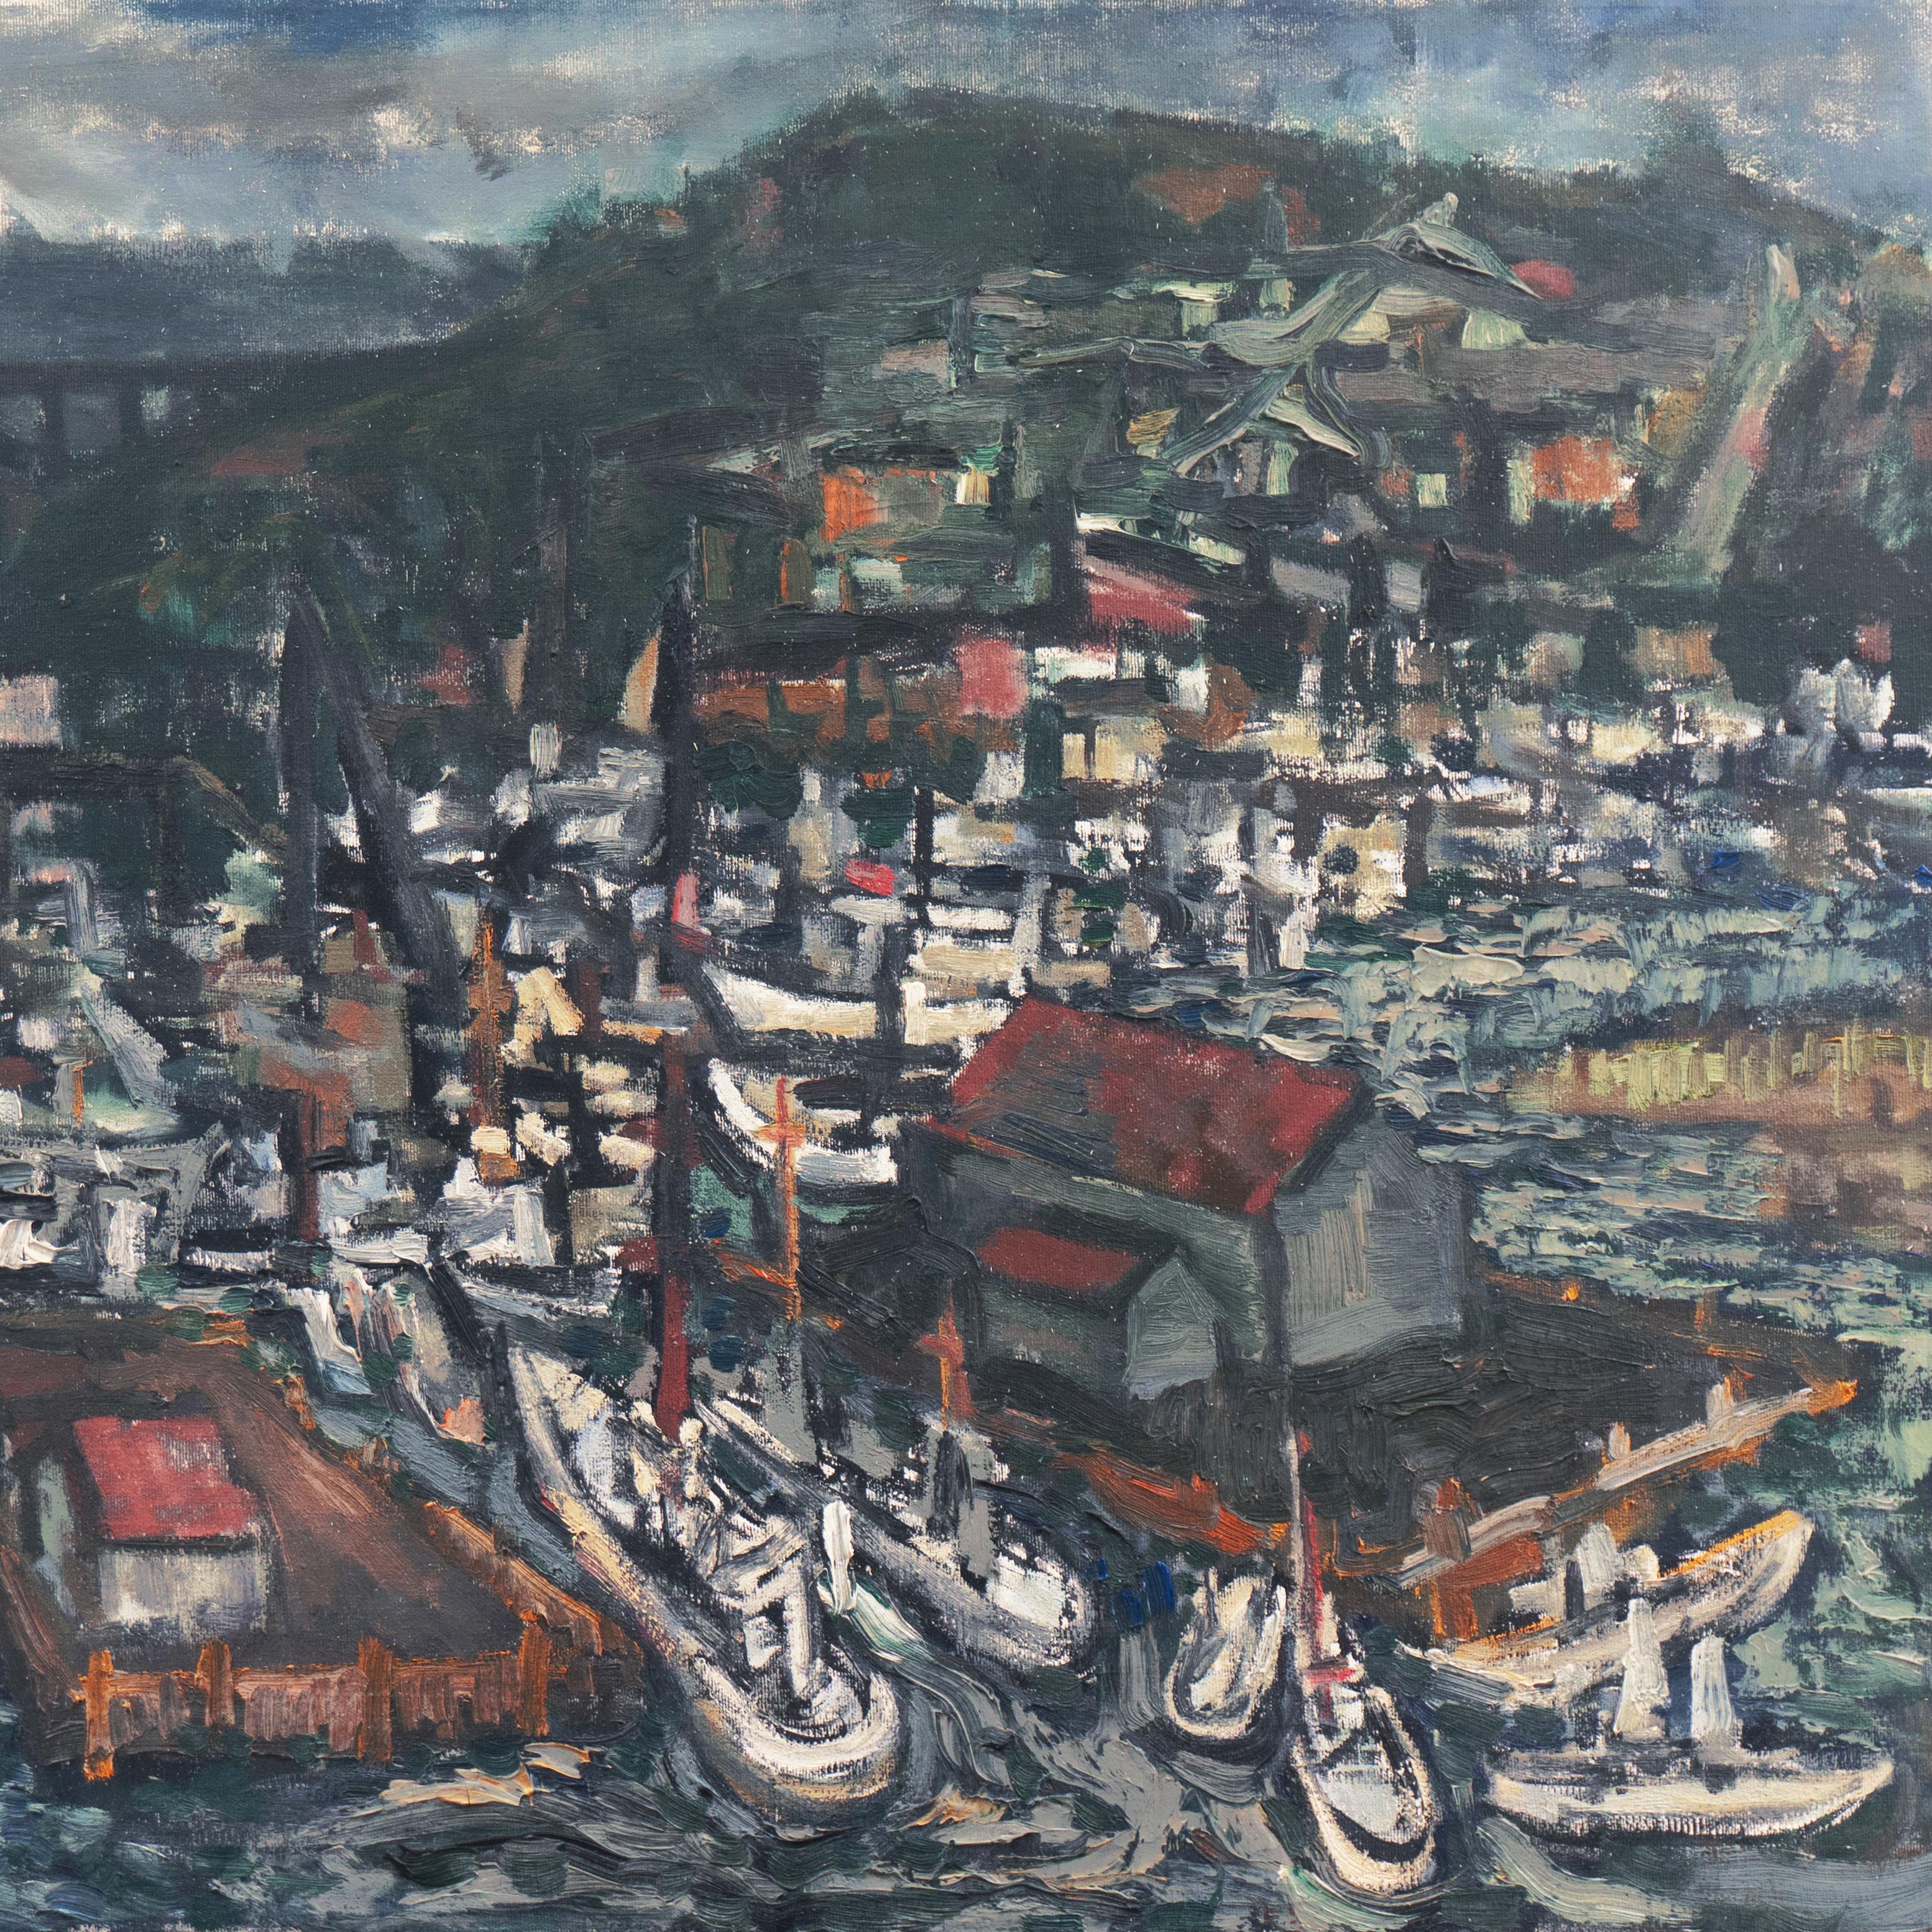 'Evening at the Harbor', Large American Post-Impressionist Oil, Marine Landscape - Gray Landscape Painting by A.F.